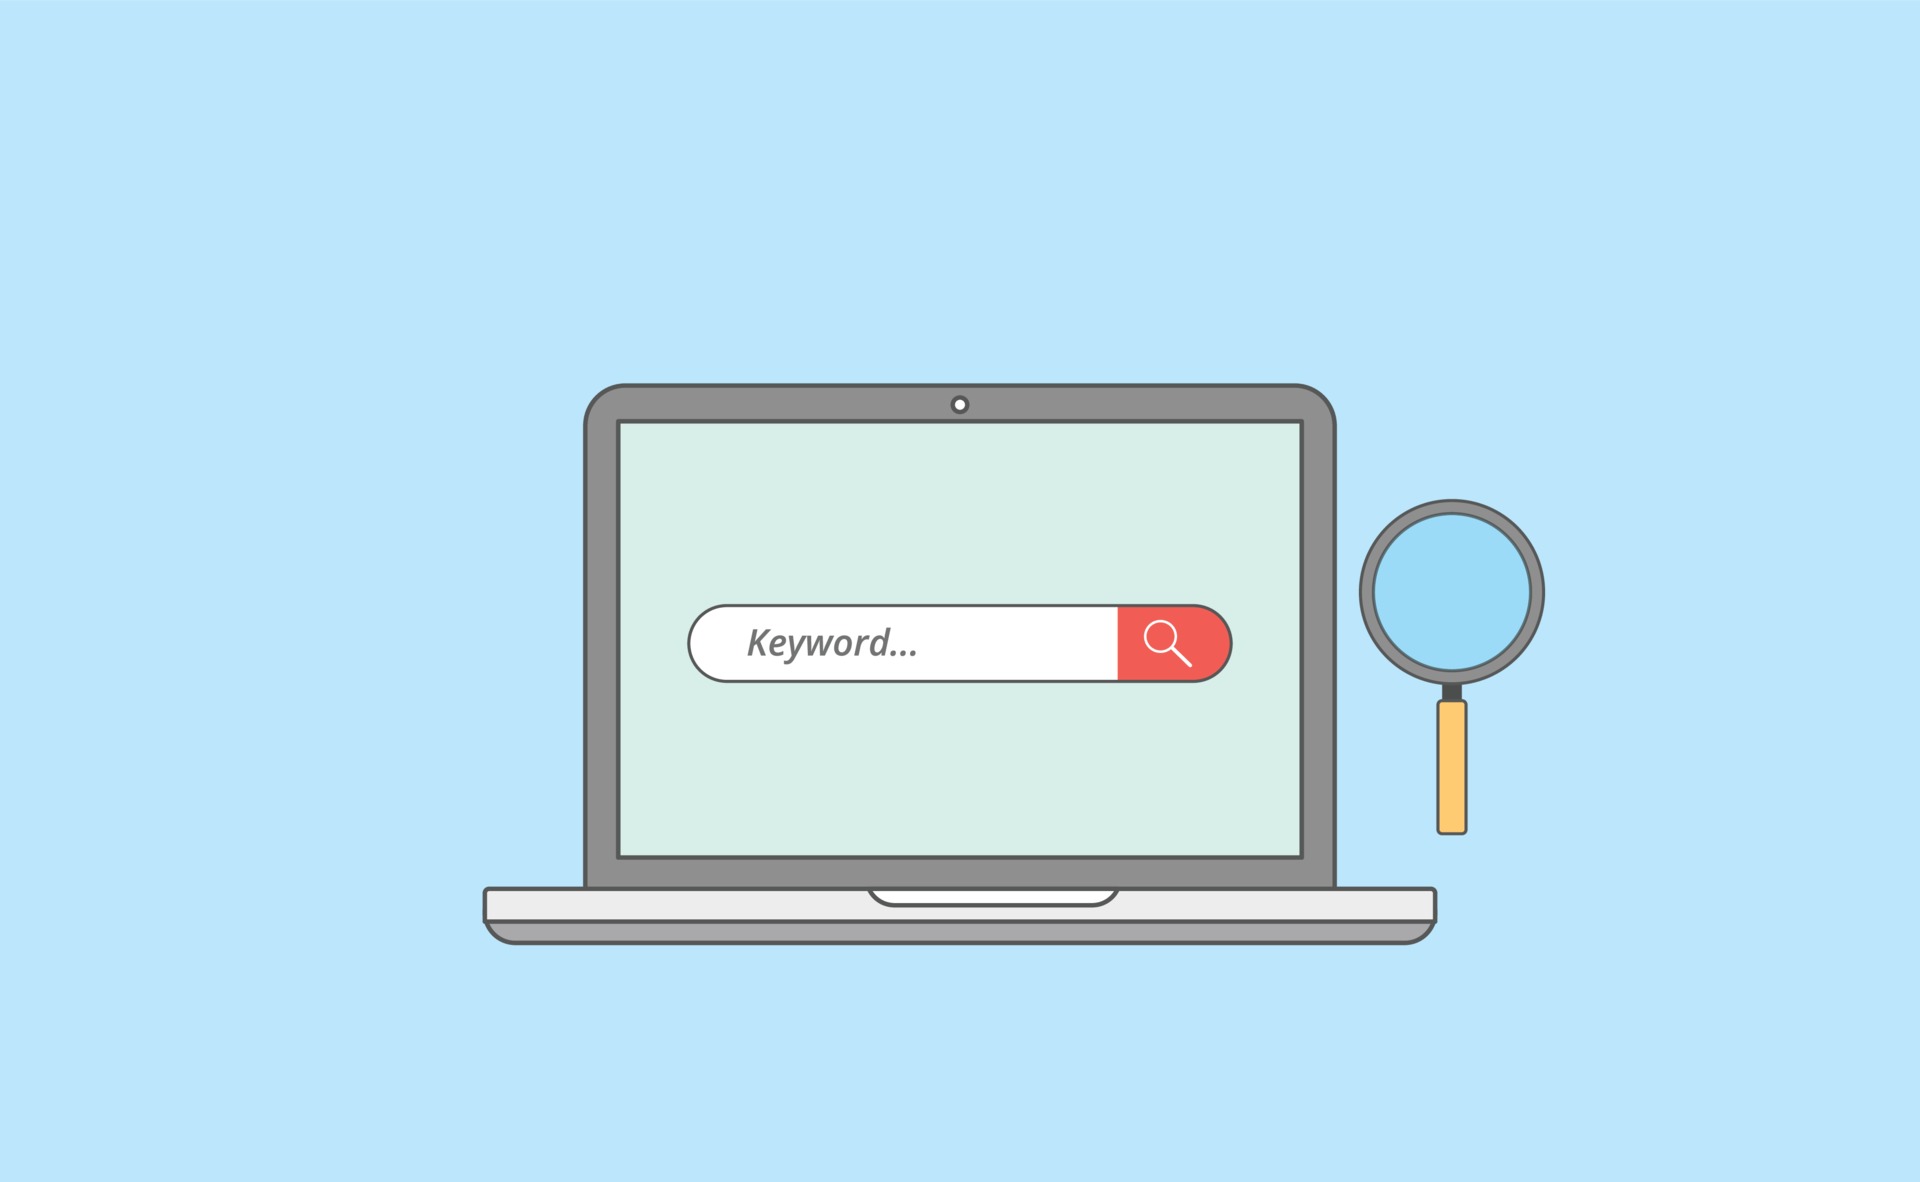 How to do keyword research for SEO?